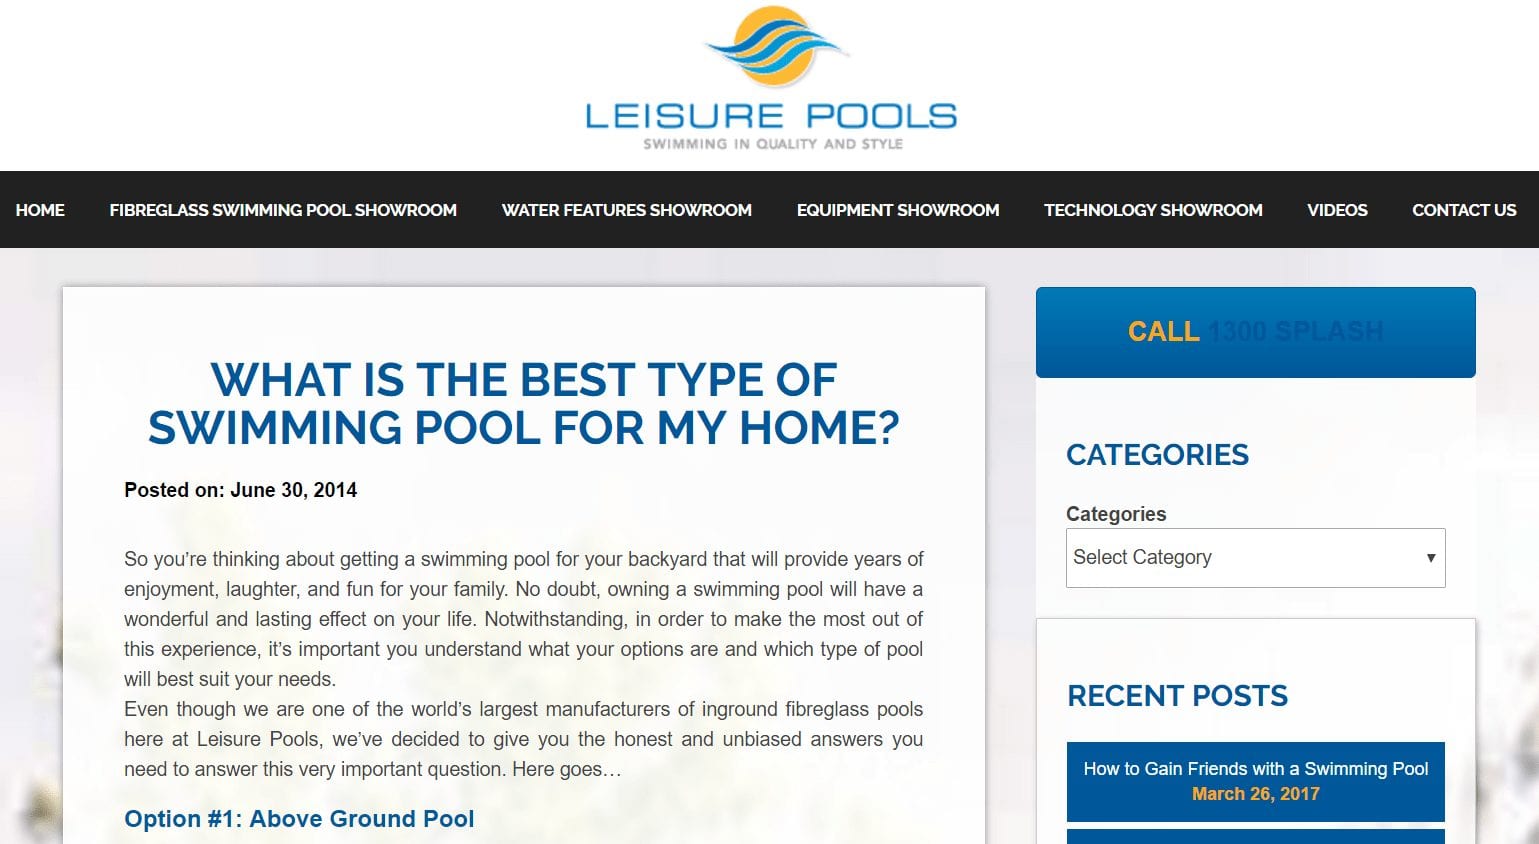  About advantages & disadvantages of buying different types of pools